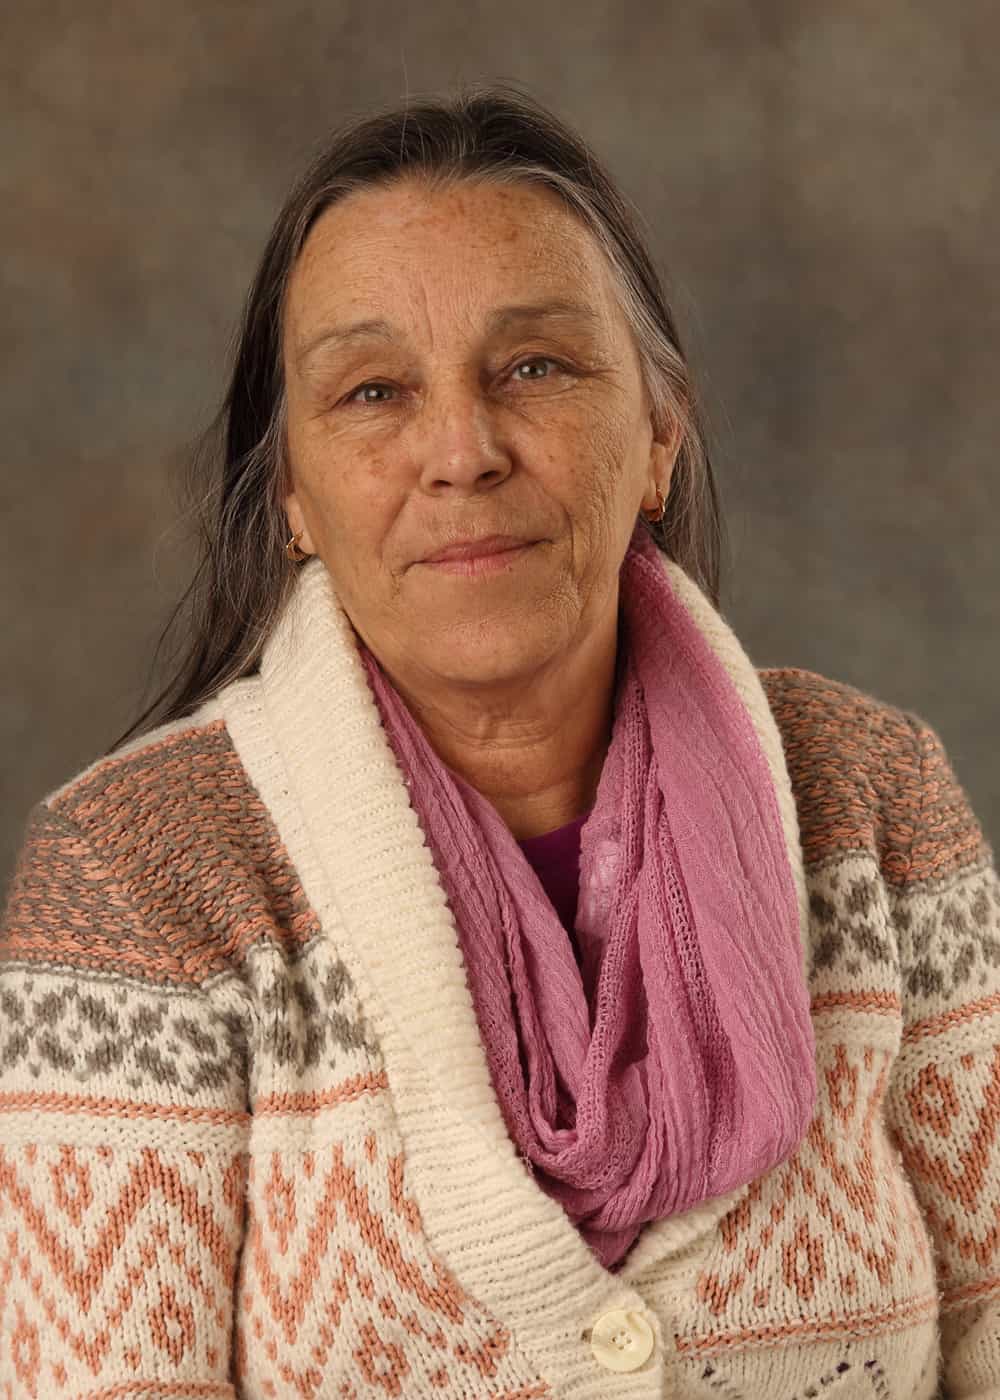 Photo of Financial and Case Manager Louise Russell. She is a Caucasian woman with long dark hair and brown eyes. She is wearing a patterned sweater with a pink scarf.